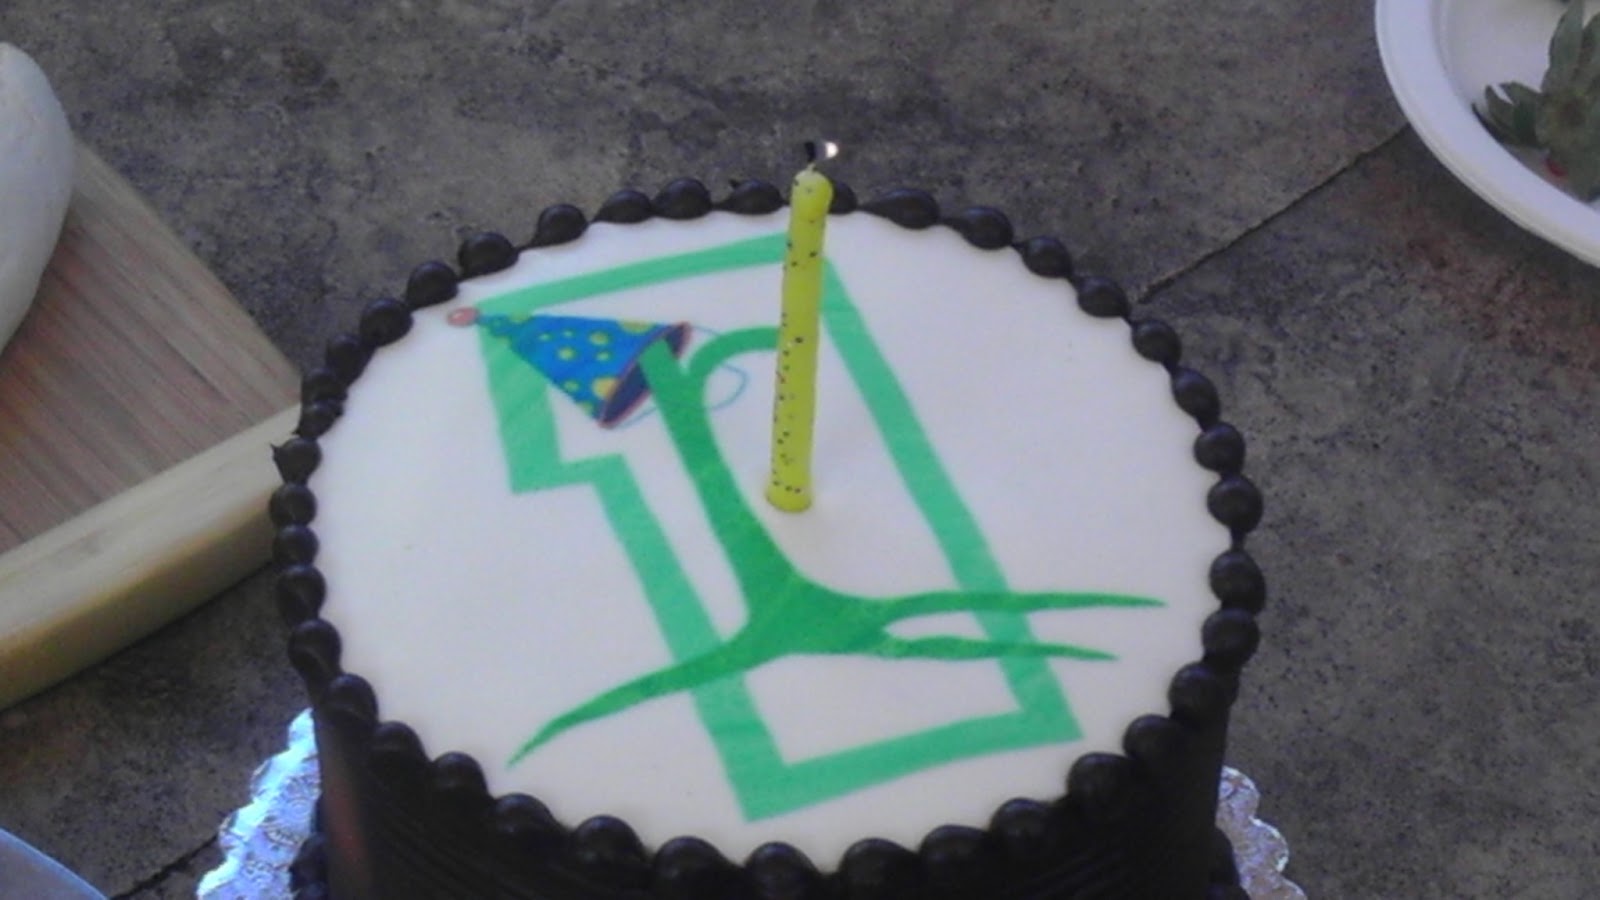 birthday cake with a number 1, a rootid logo and a yellow candle